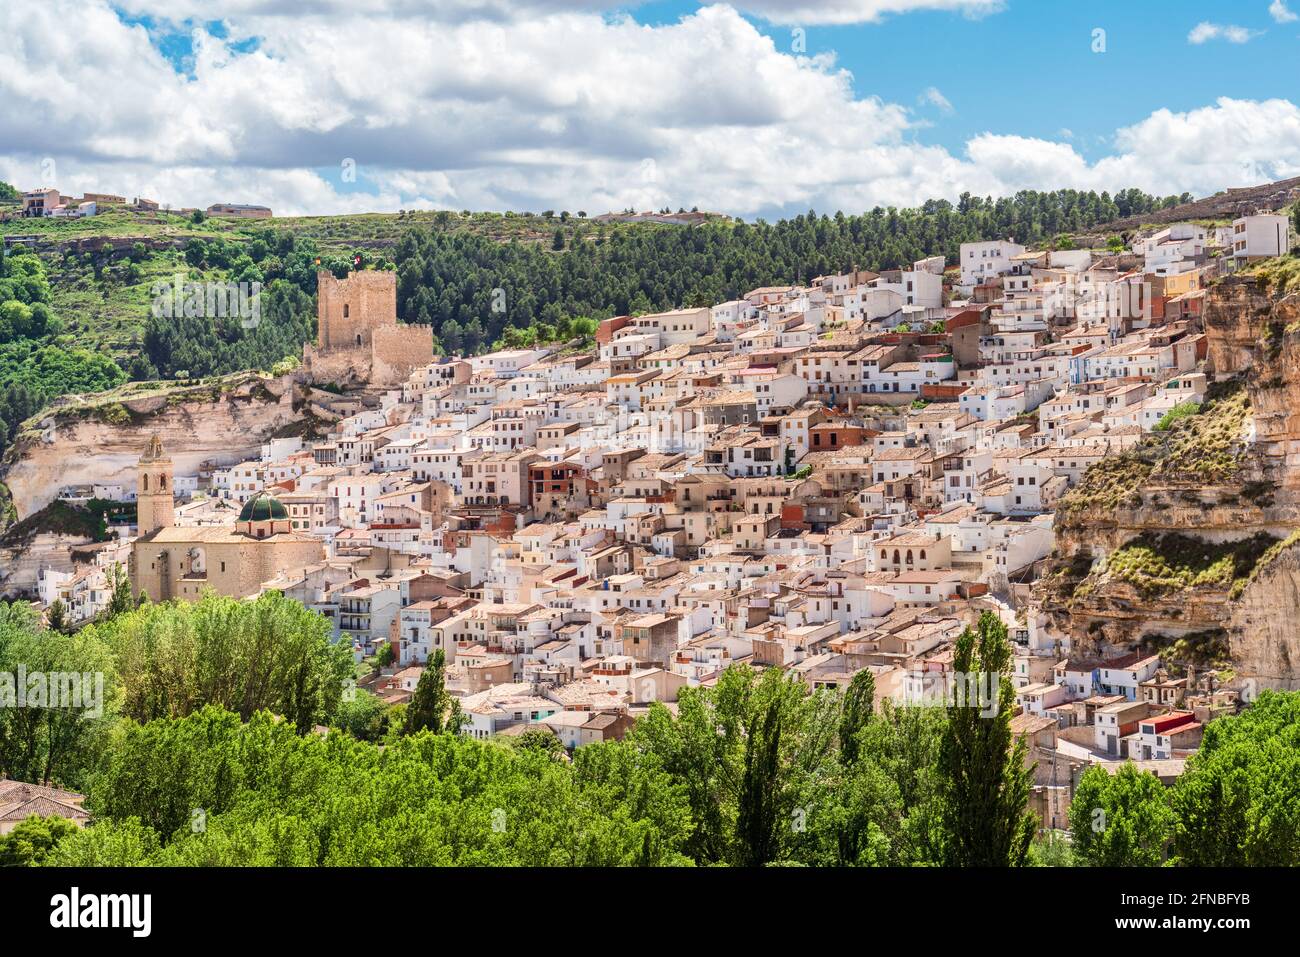 View of Spanish white town with castle and bell tower, Alcala del Jucar, Castilla La Mancha, Spain Stock Photo